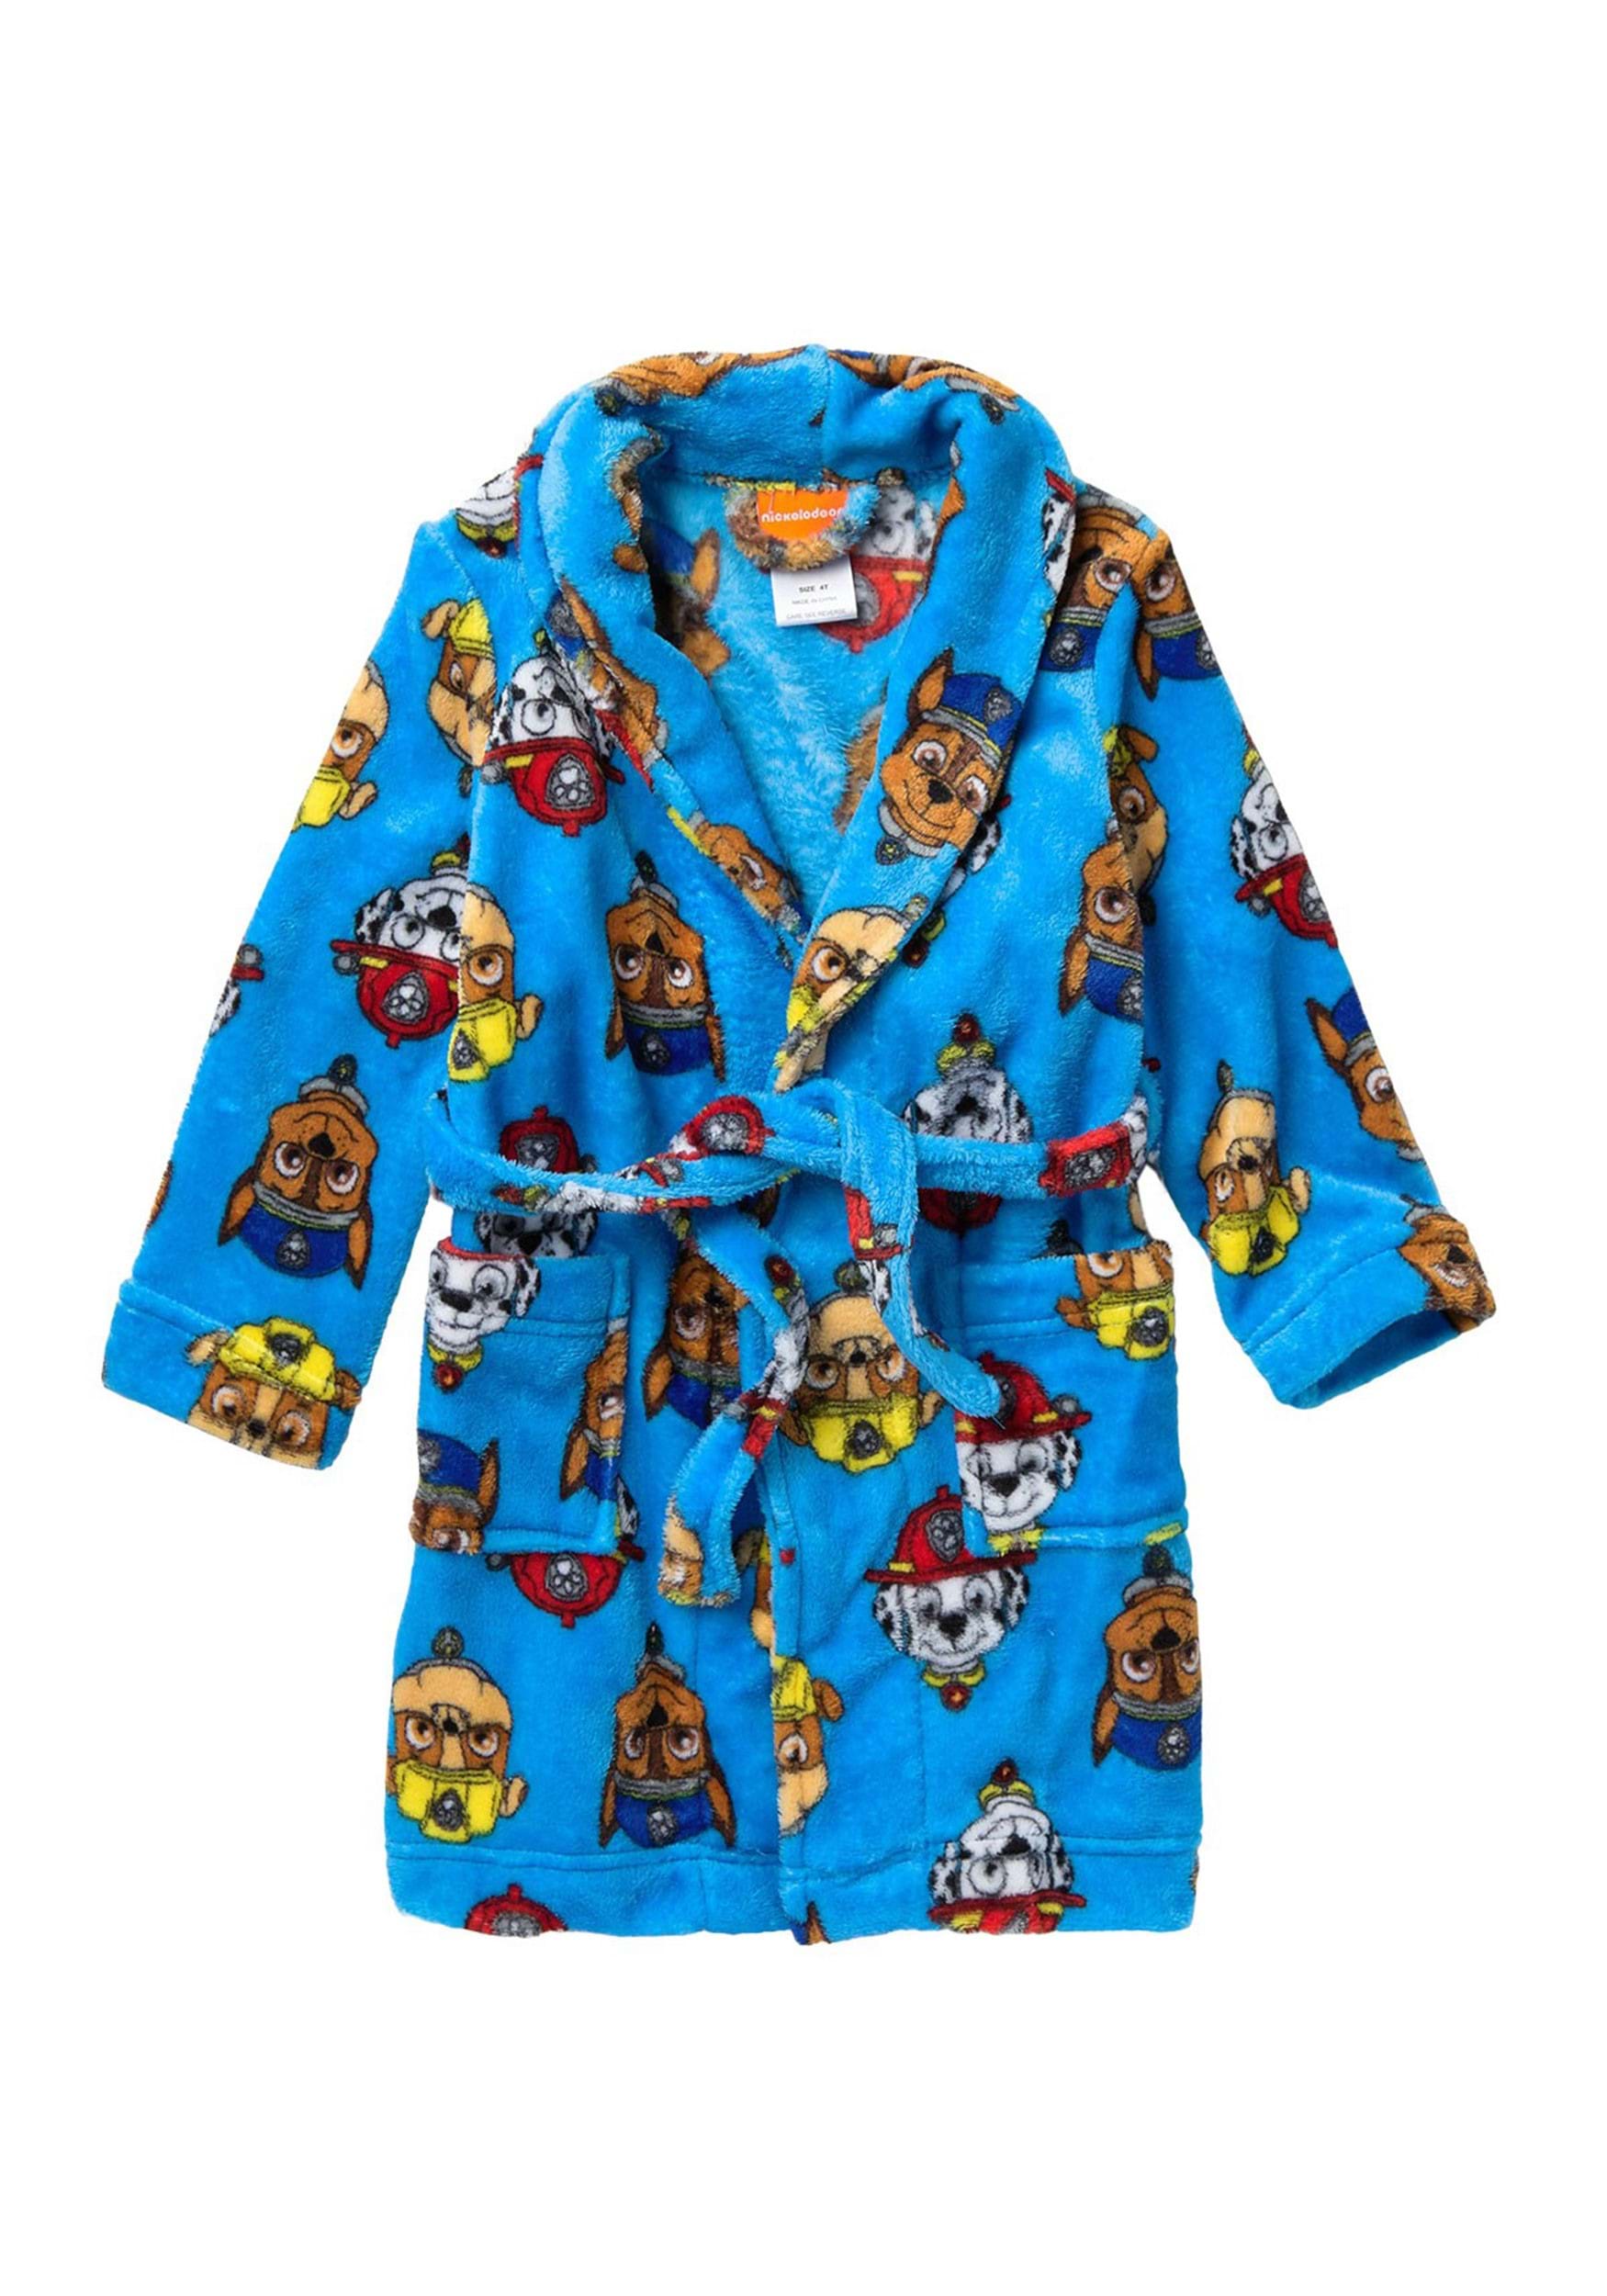 Paw Patrol Robe for Toddlers